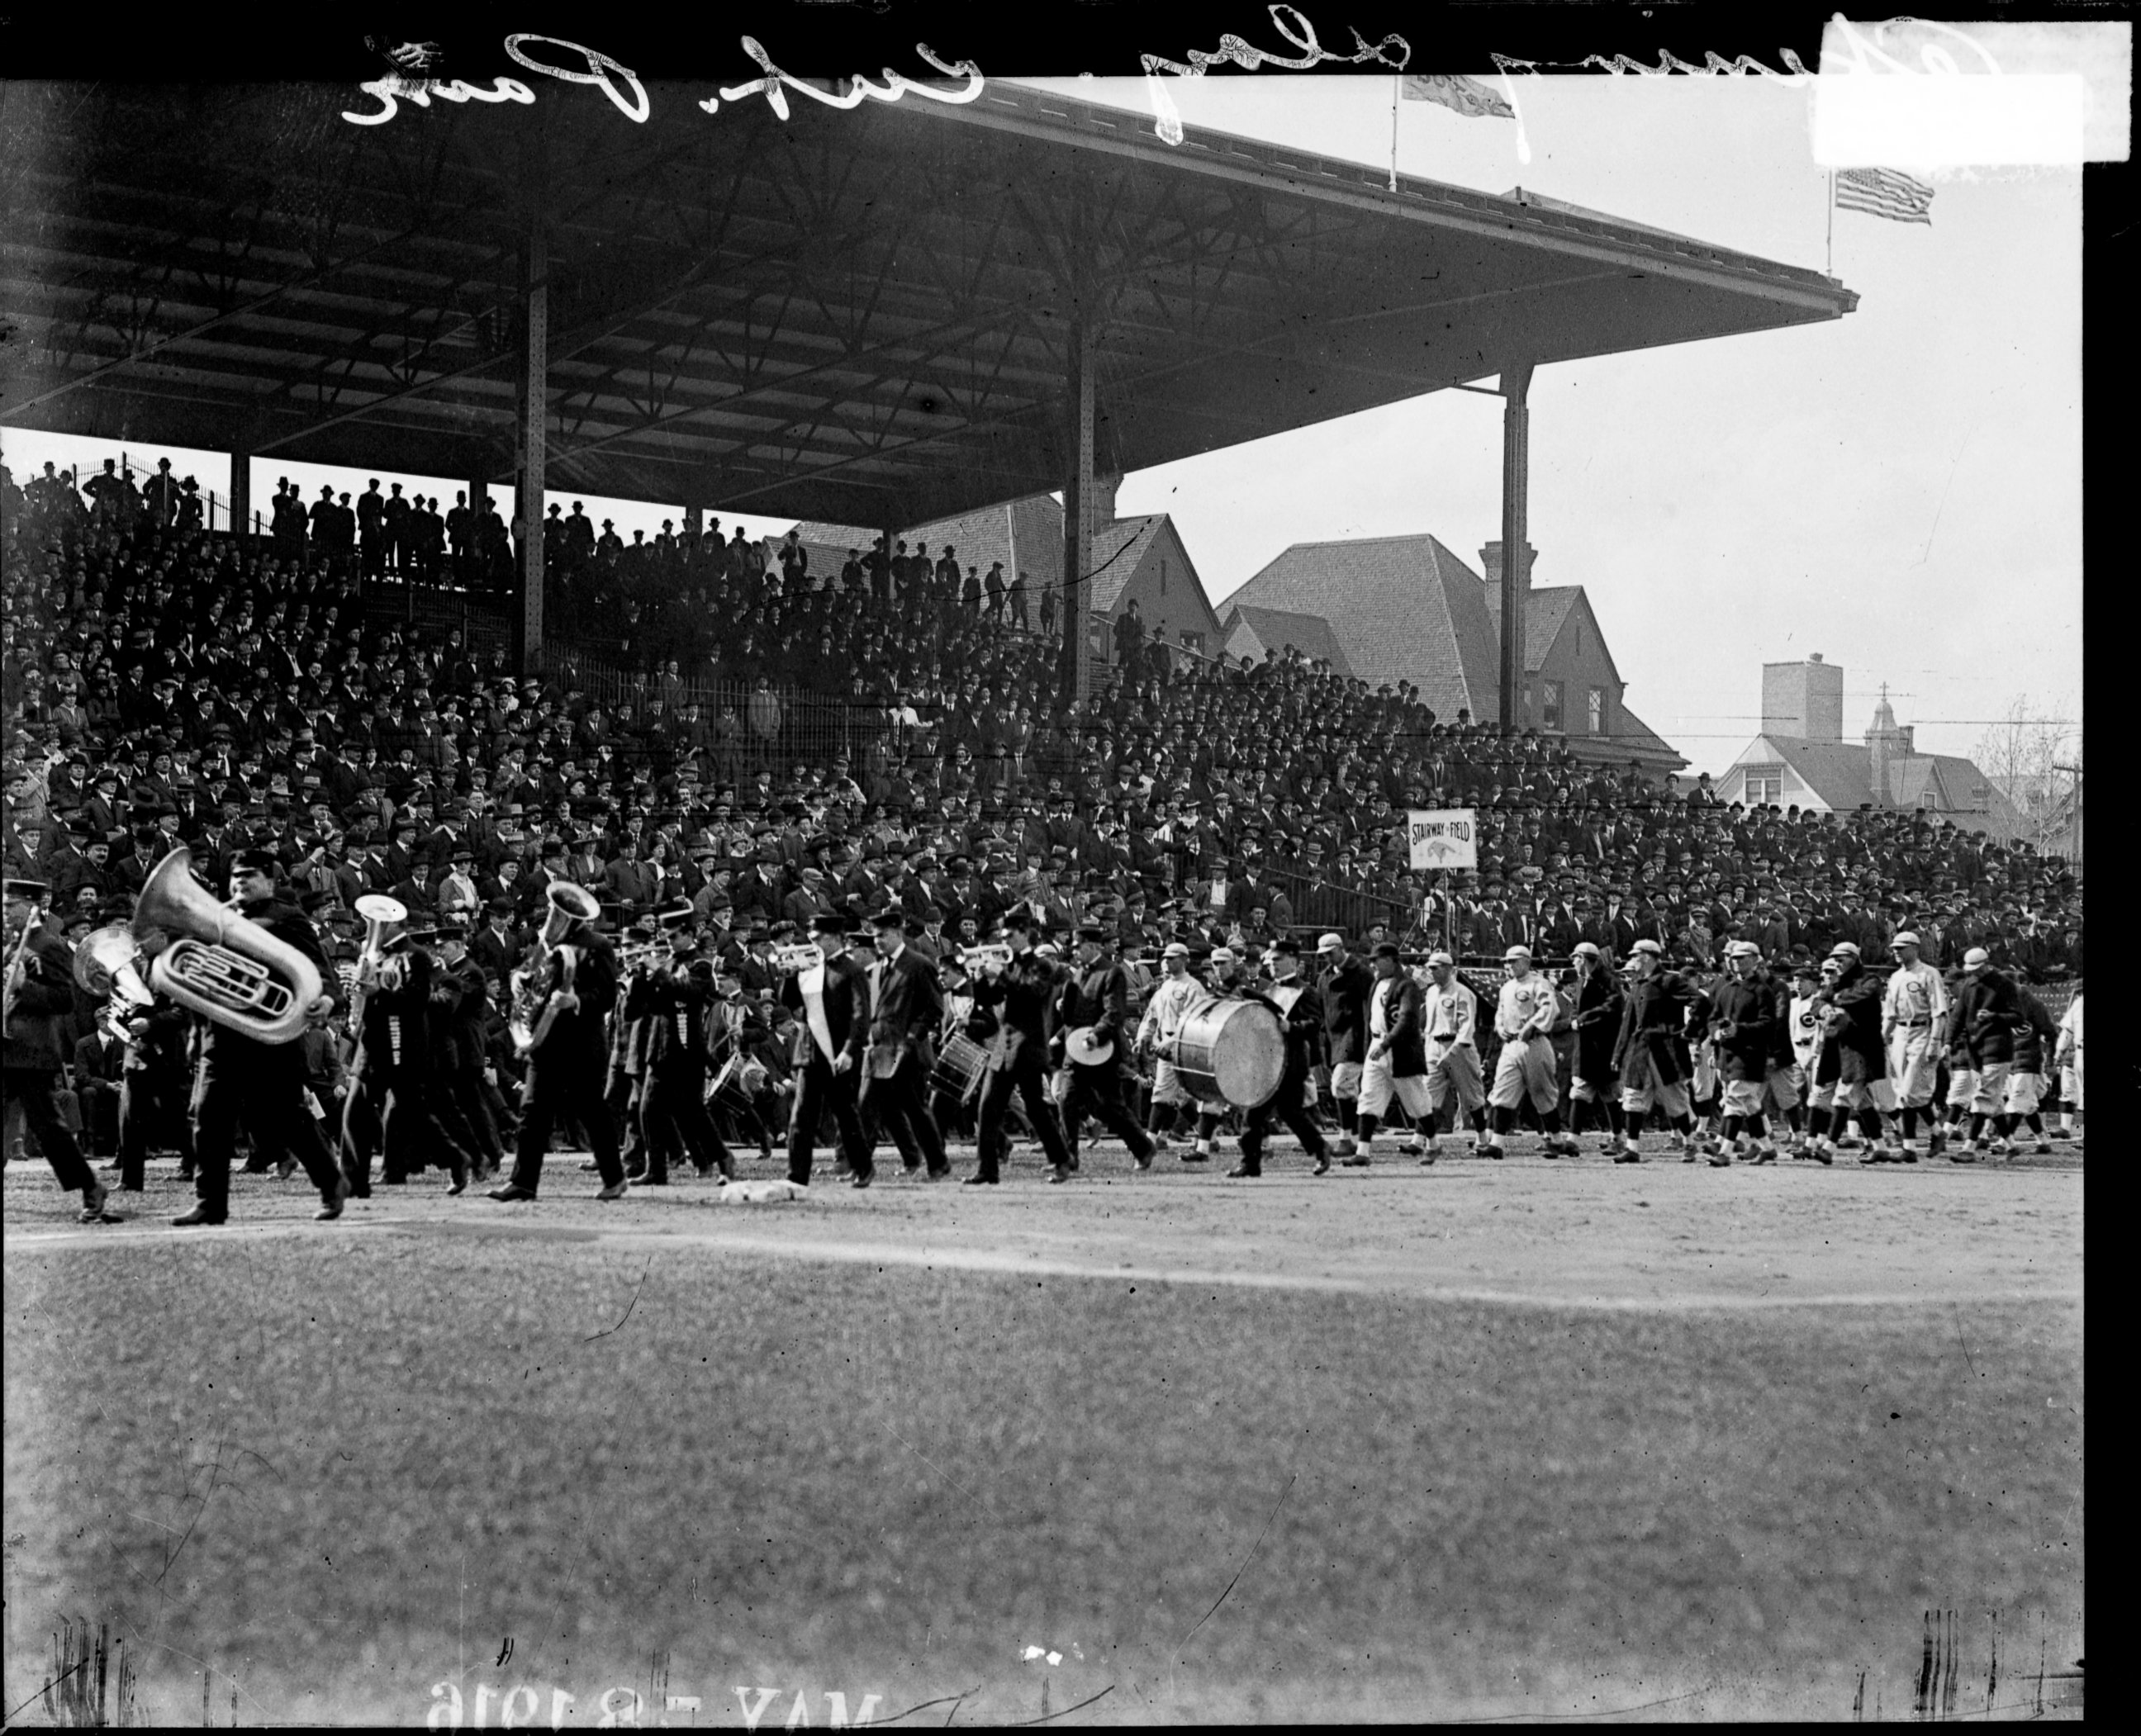 PHOTO: Chicago Cubs baseball team following a marching band at Weeghman Park on opening day in 1916, Chicago, ILL.  Weeghman Park was renamed Wrigley Field in 1927. 